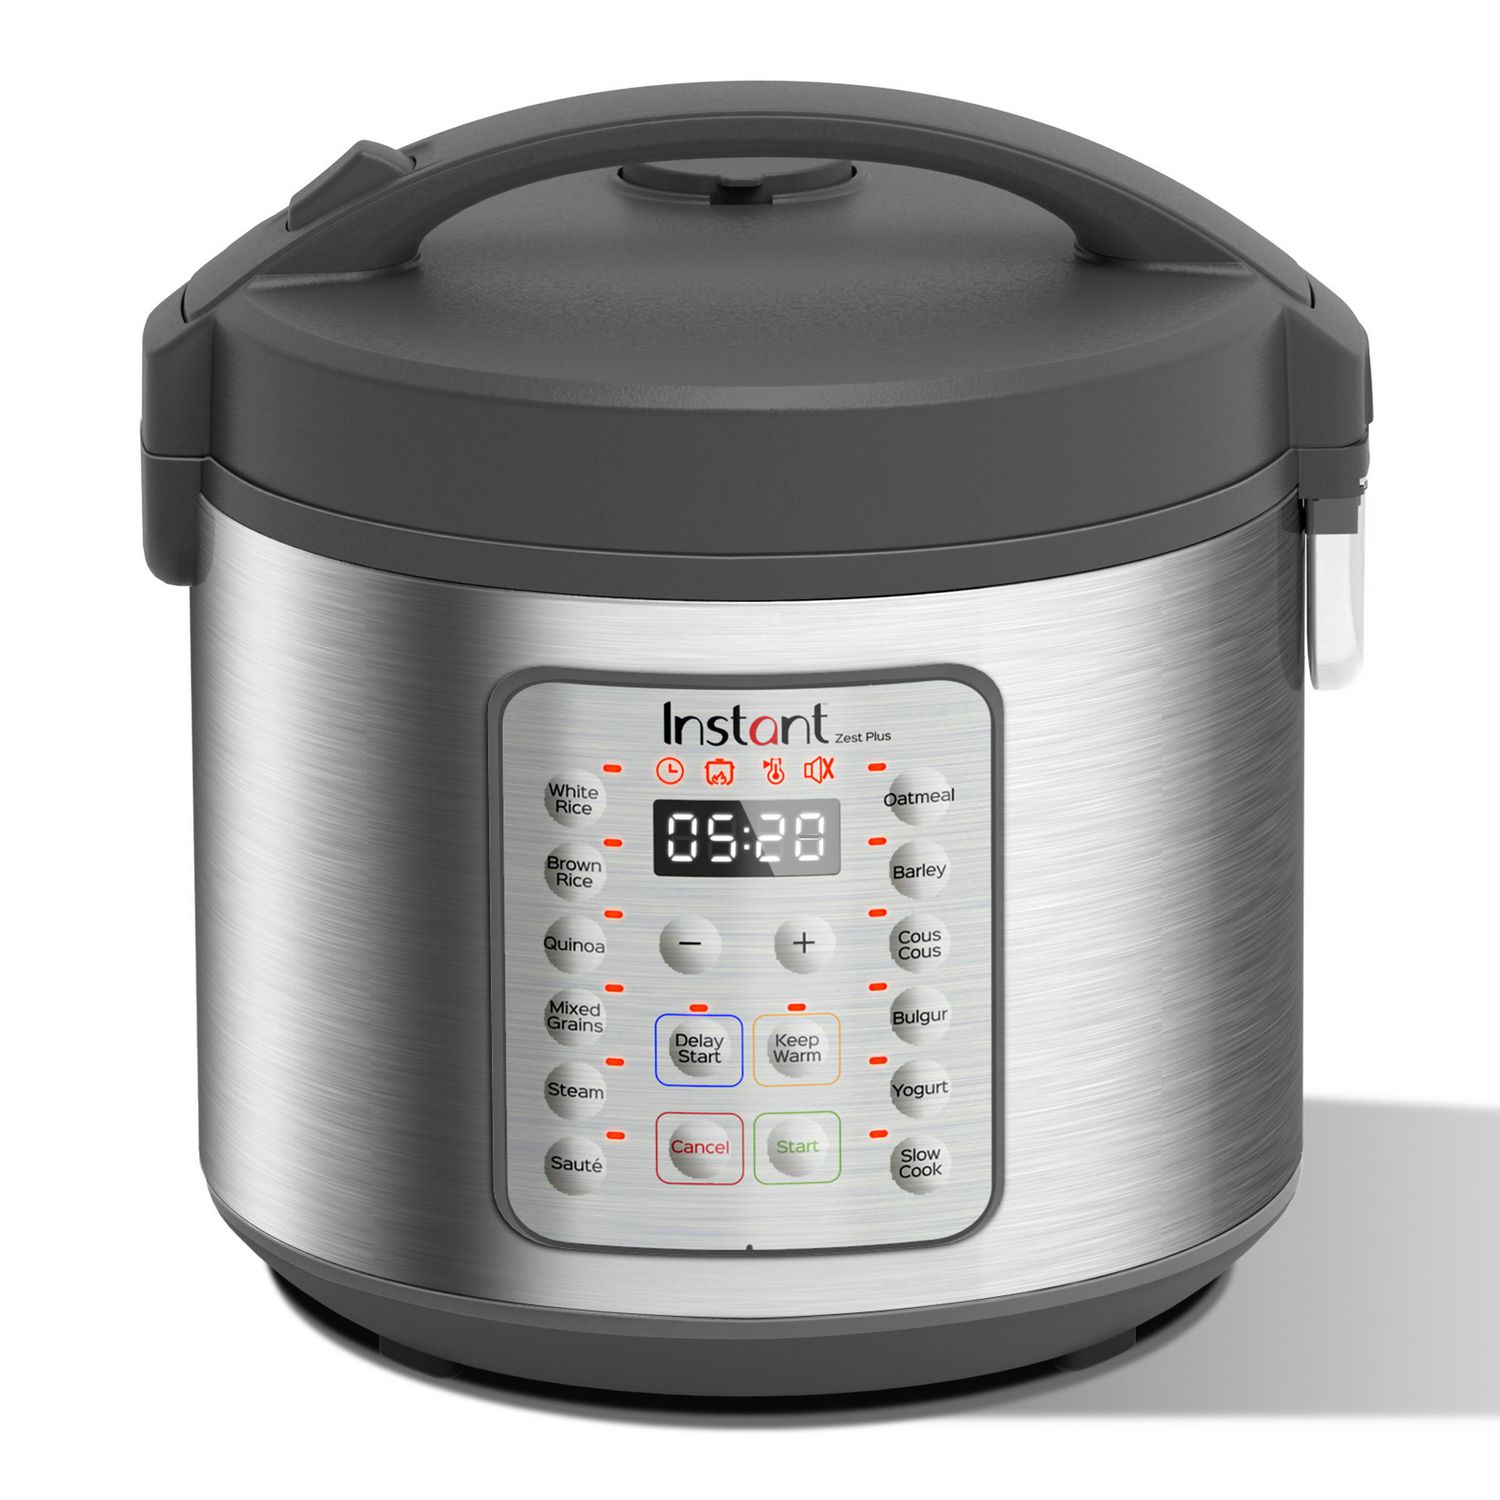 Instant Zest 20 Cup Rice and Grain Cooker Stainless Steel/Silver  140-5001-01 - Best Buy